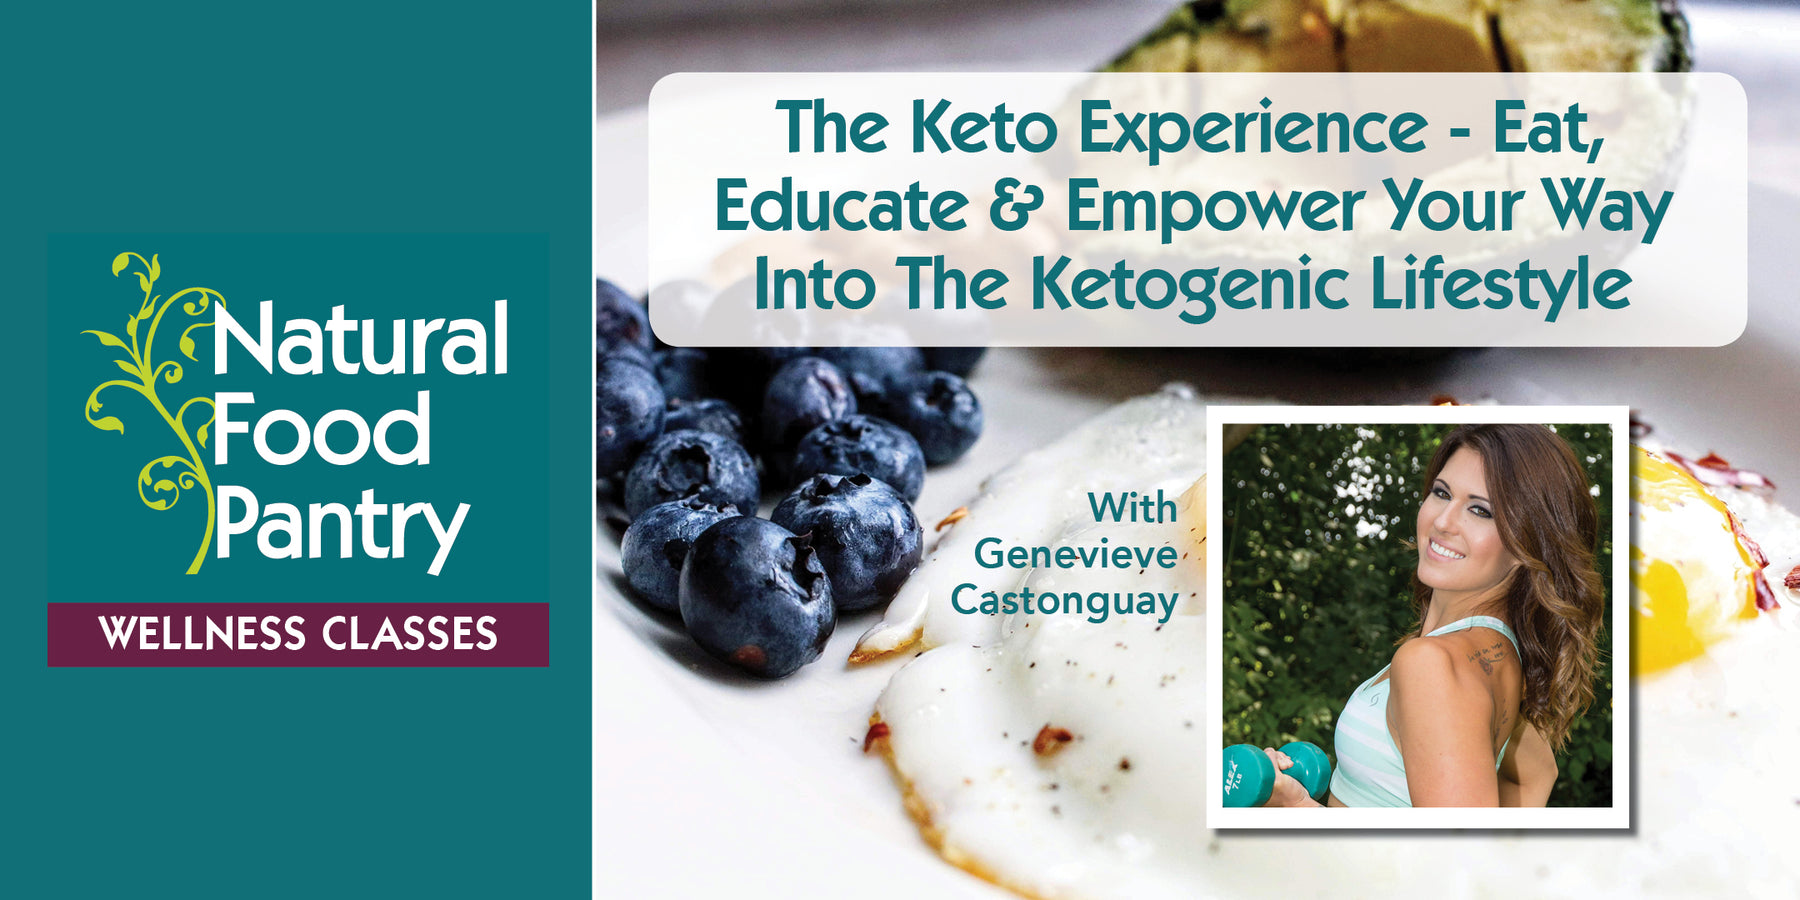 May 6: The Keto Experience: Eat, Educate & Empower Your Way Into The Ketogenic Lifestyle